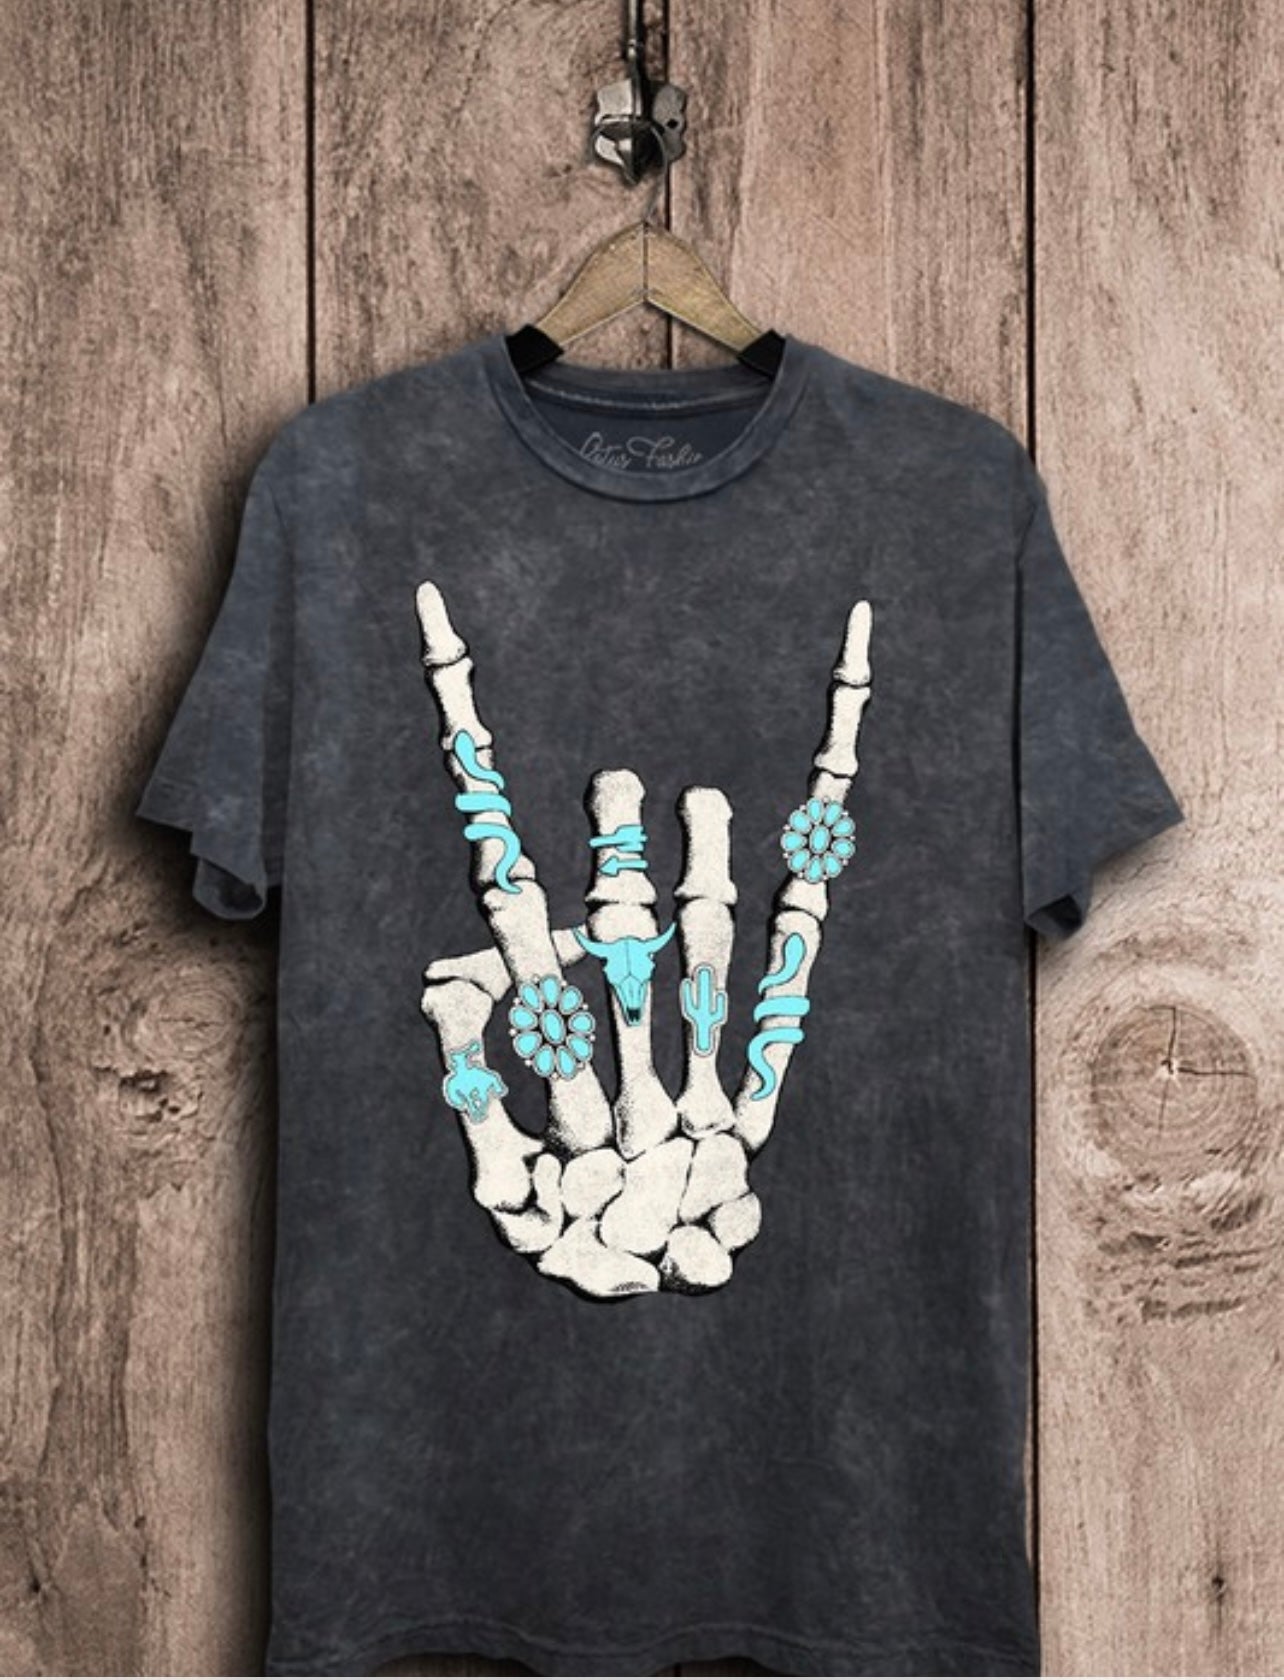 Vintage Black Tee with a white hand with the rock on hand sign, featuring turquoise stones that look like rings